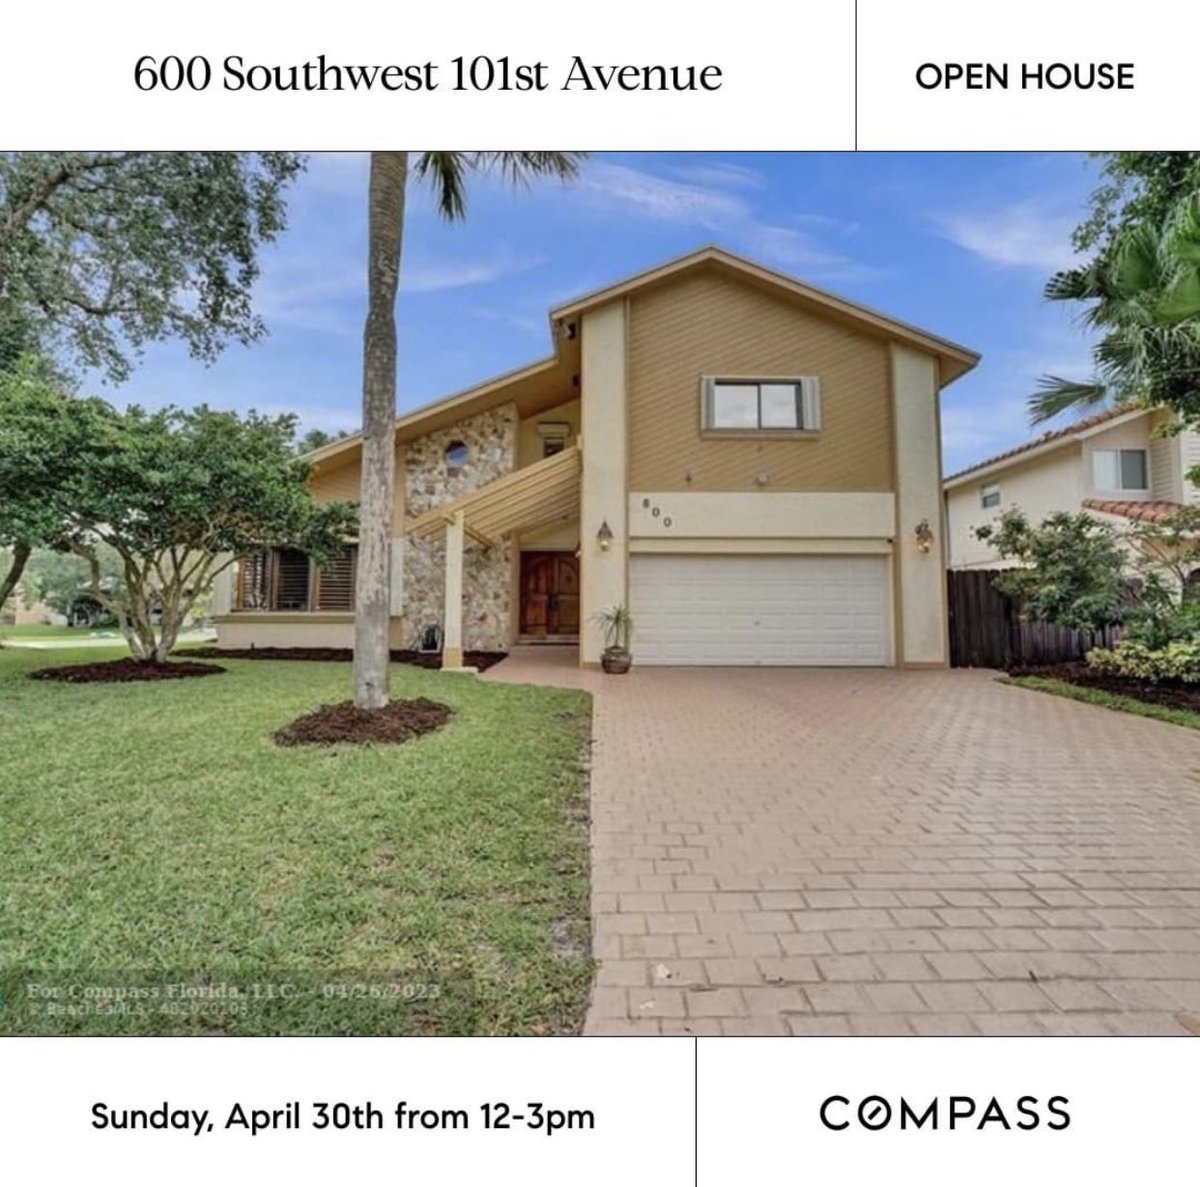 OPEN HOUSE!  Join US!  Sunday April 30th from 
12-3pm in Plantation.  Contact Lisa Echea for more information.  305-431-4745
#compassagent #echeagroup #justlistedhomes #ftlauderdalerealestate #listingspecialist #lisaechea #jacaranda #plantation